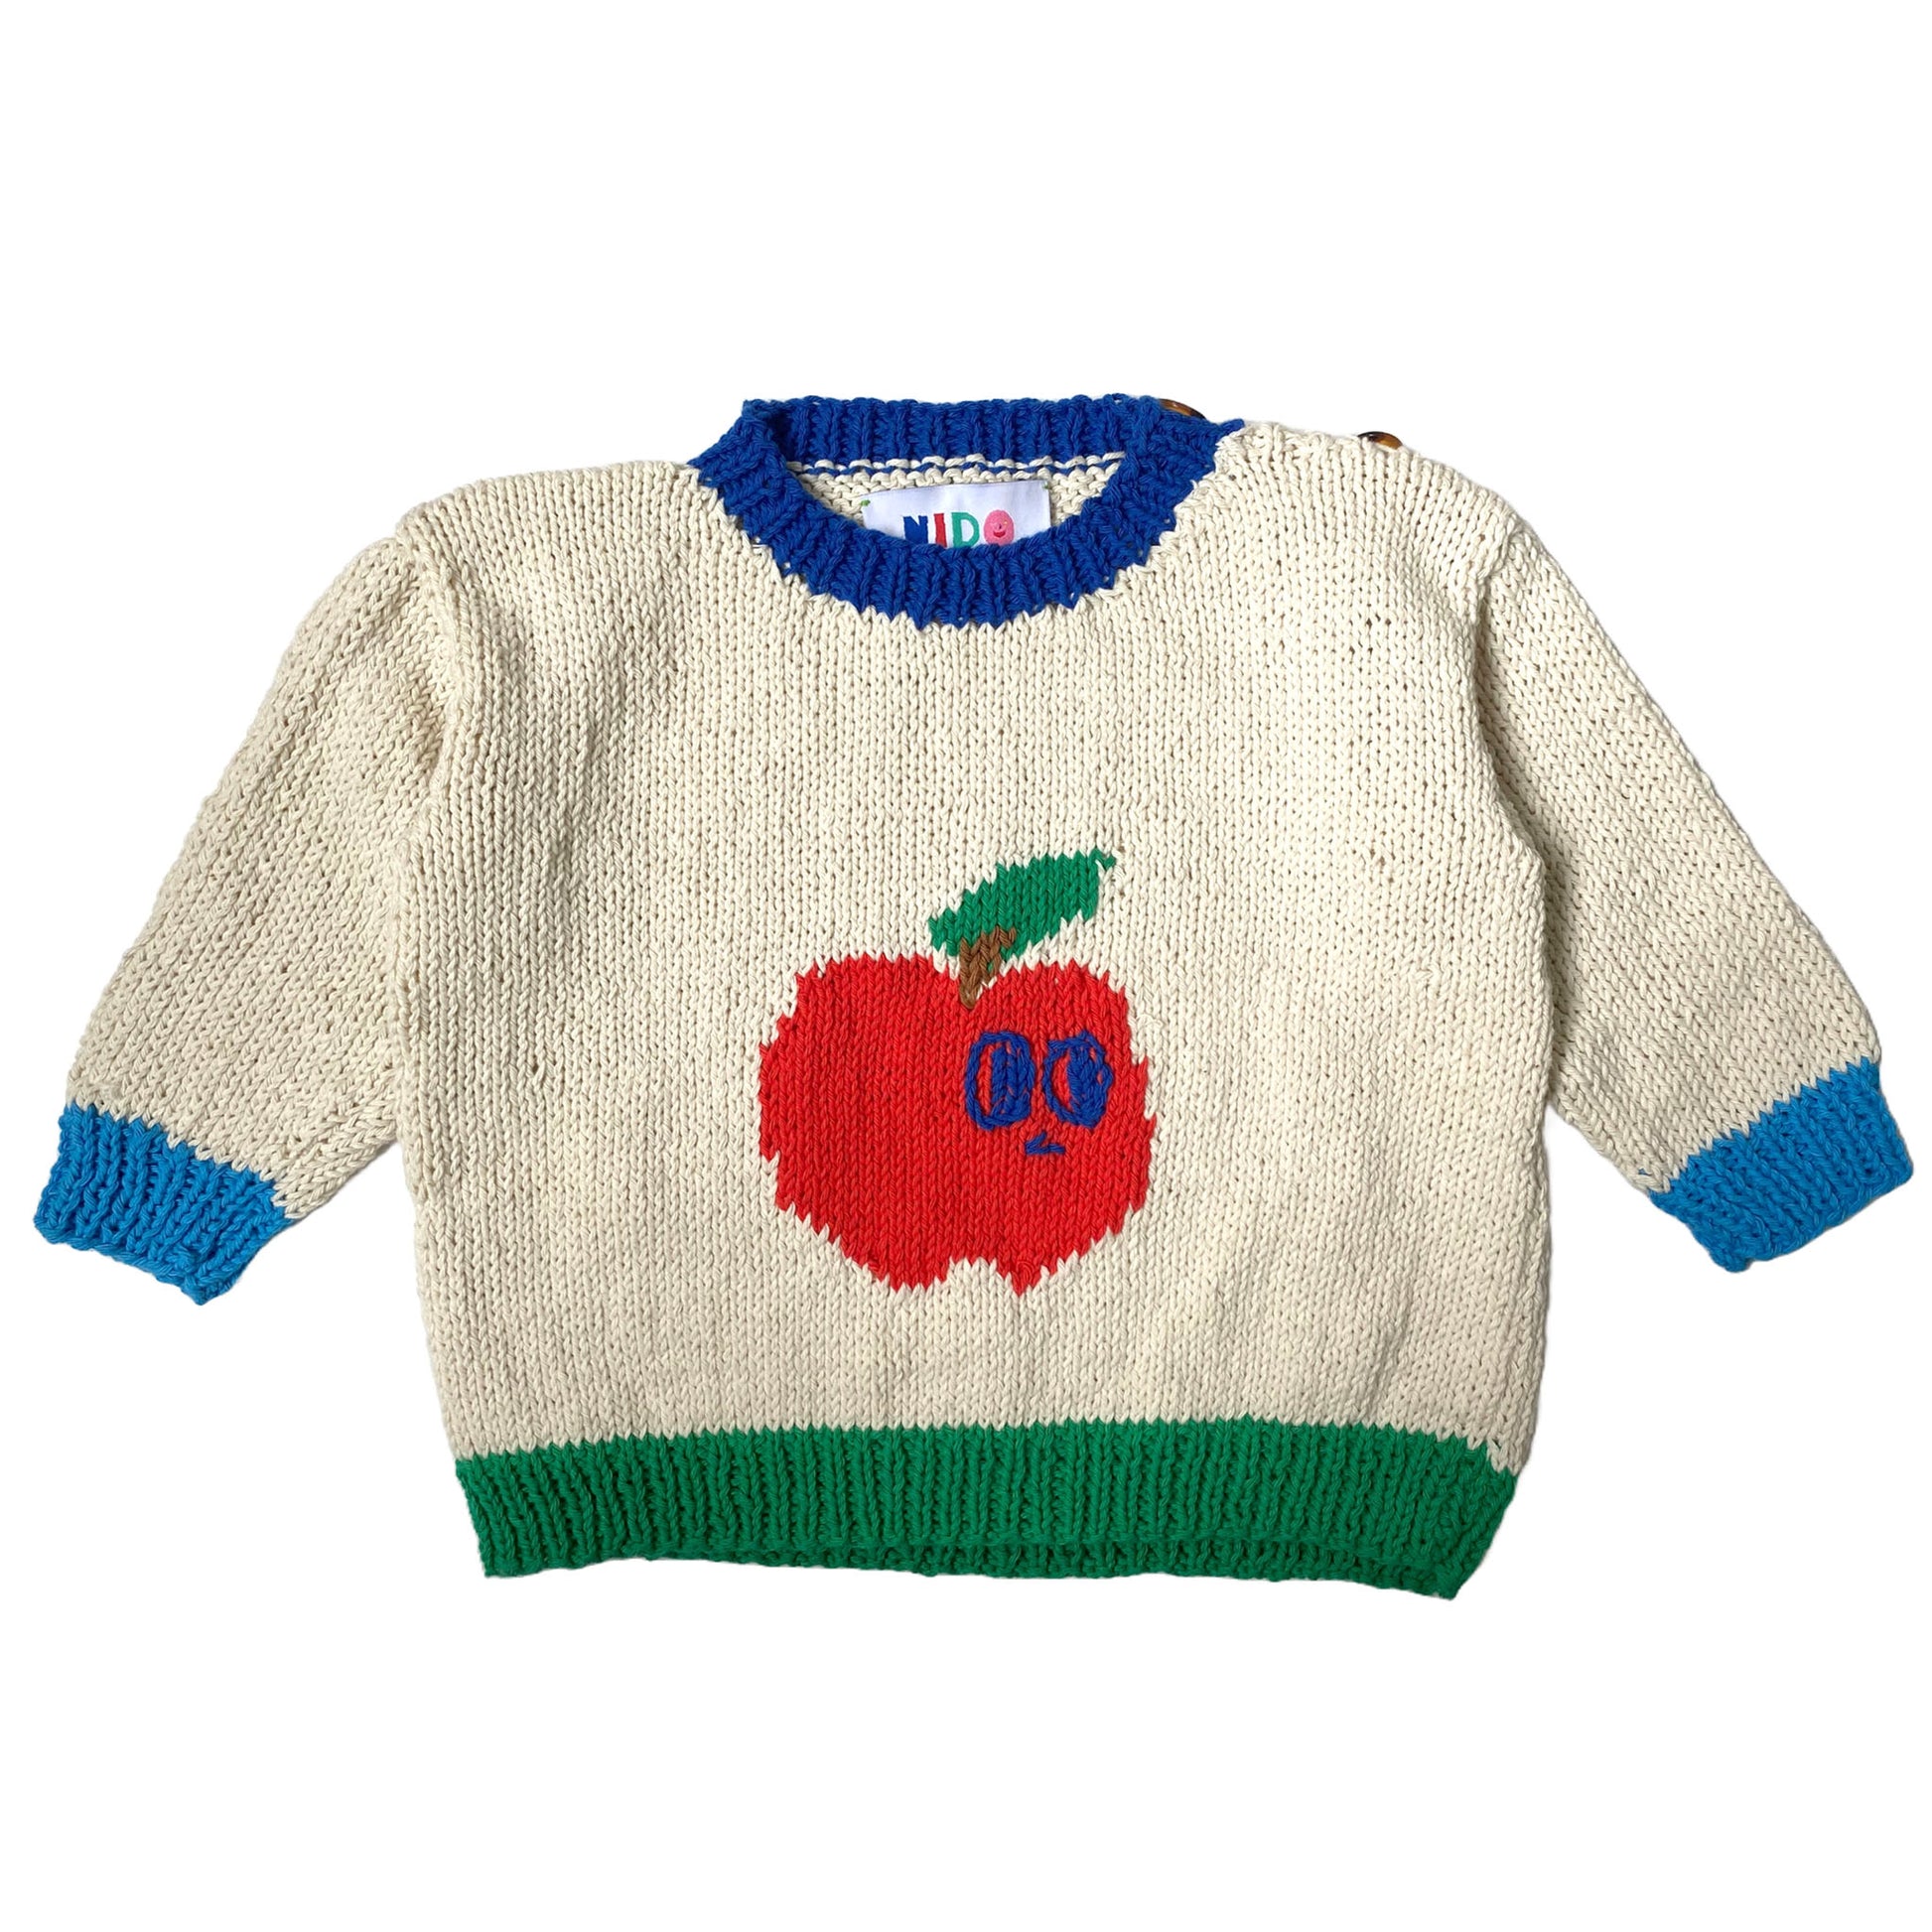 apple sweater, hand knitted for kids